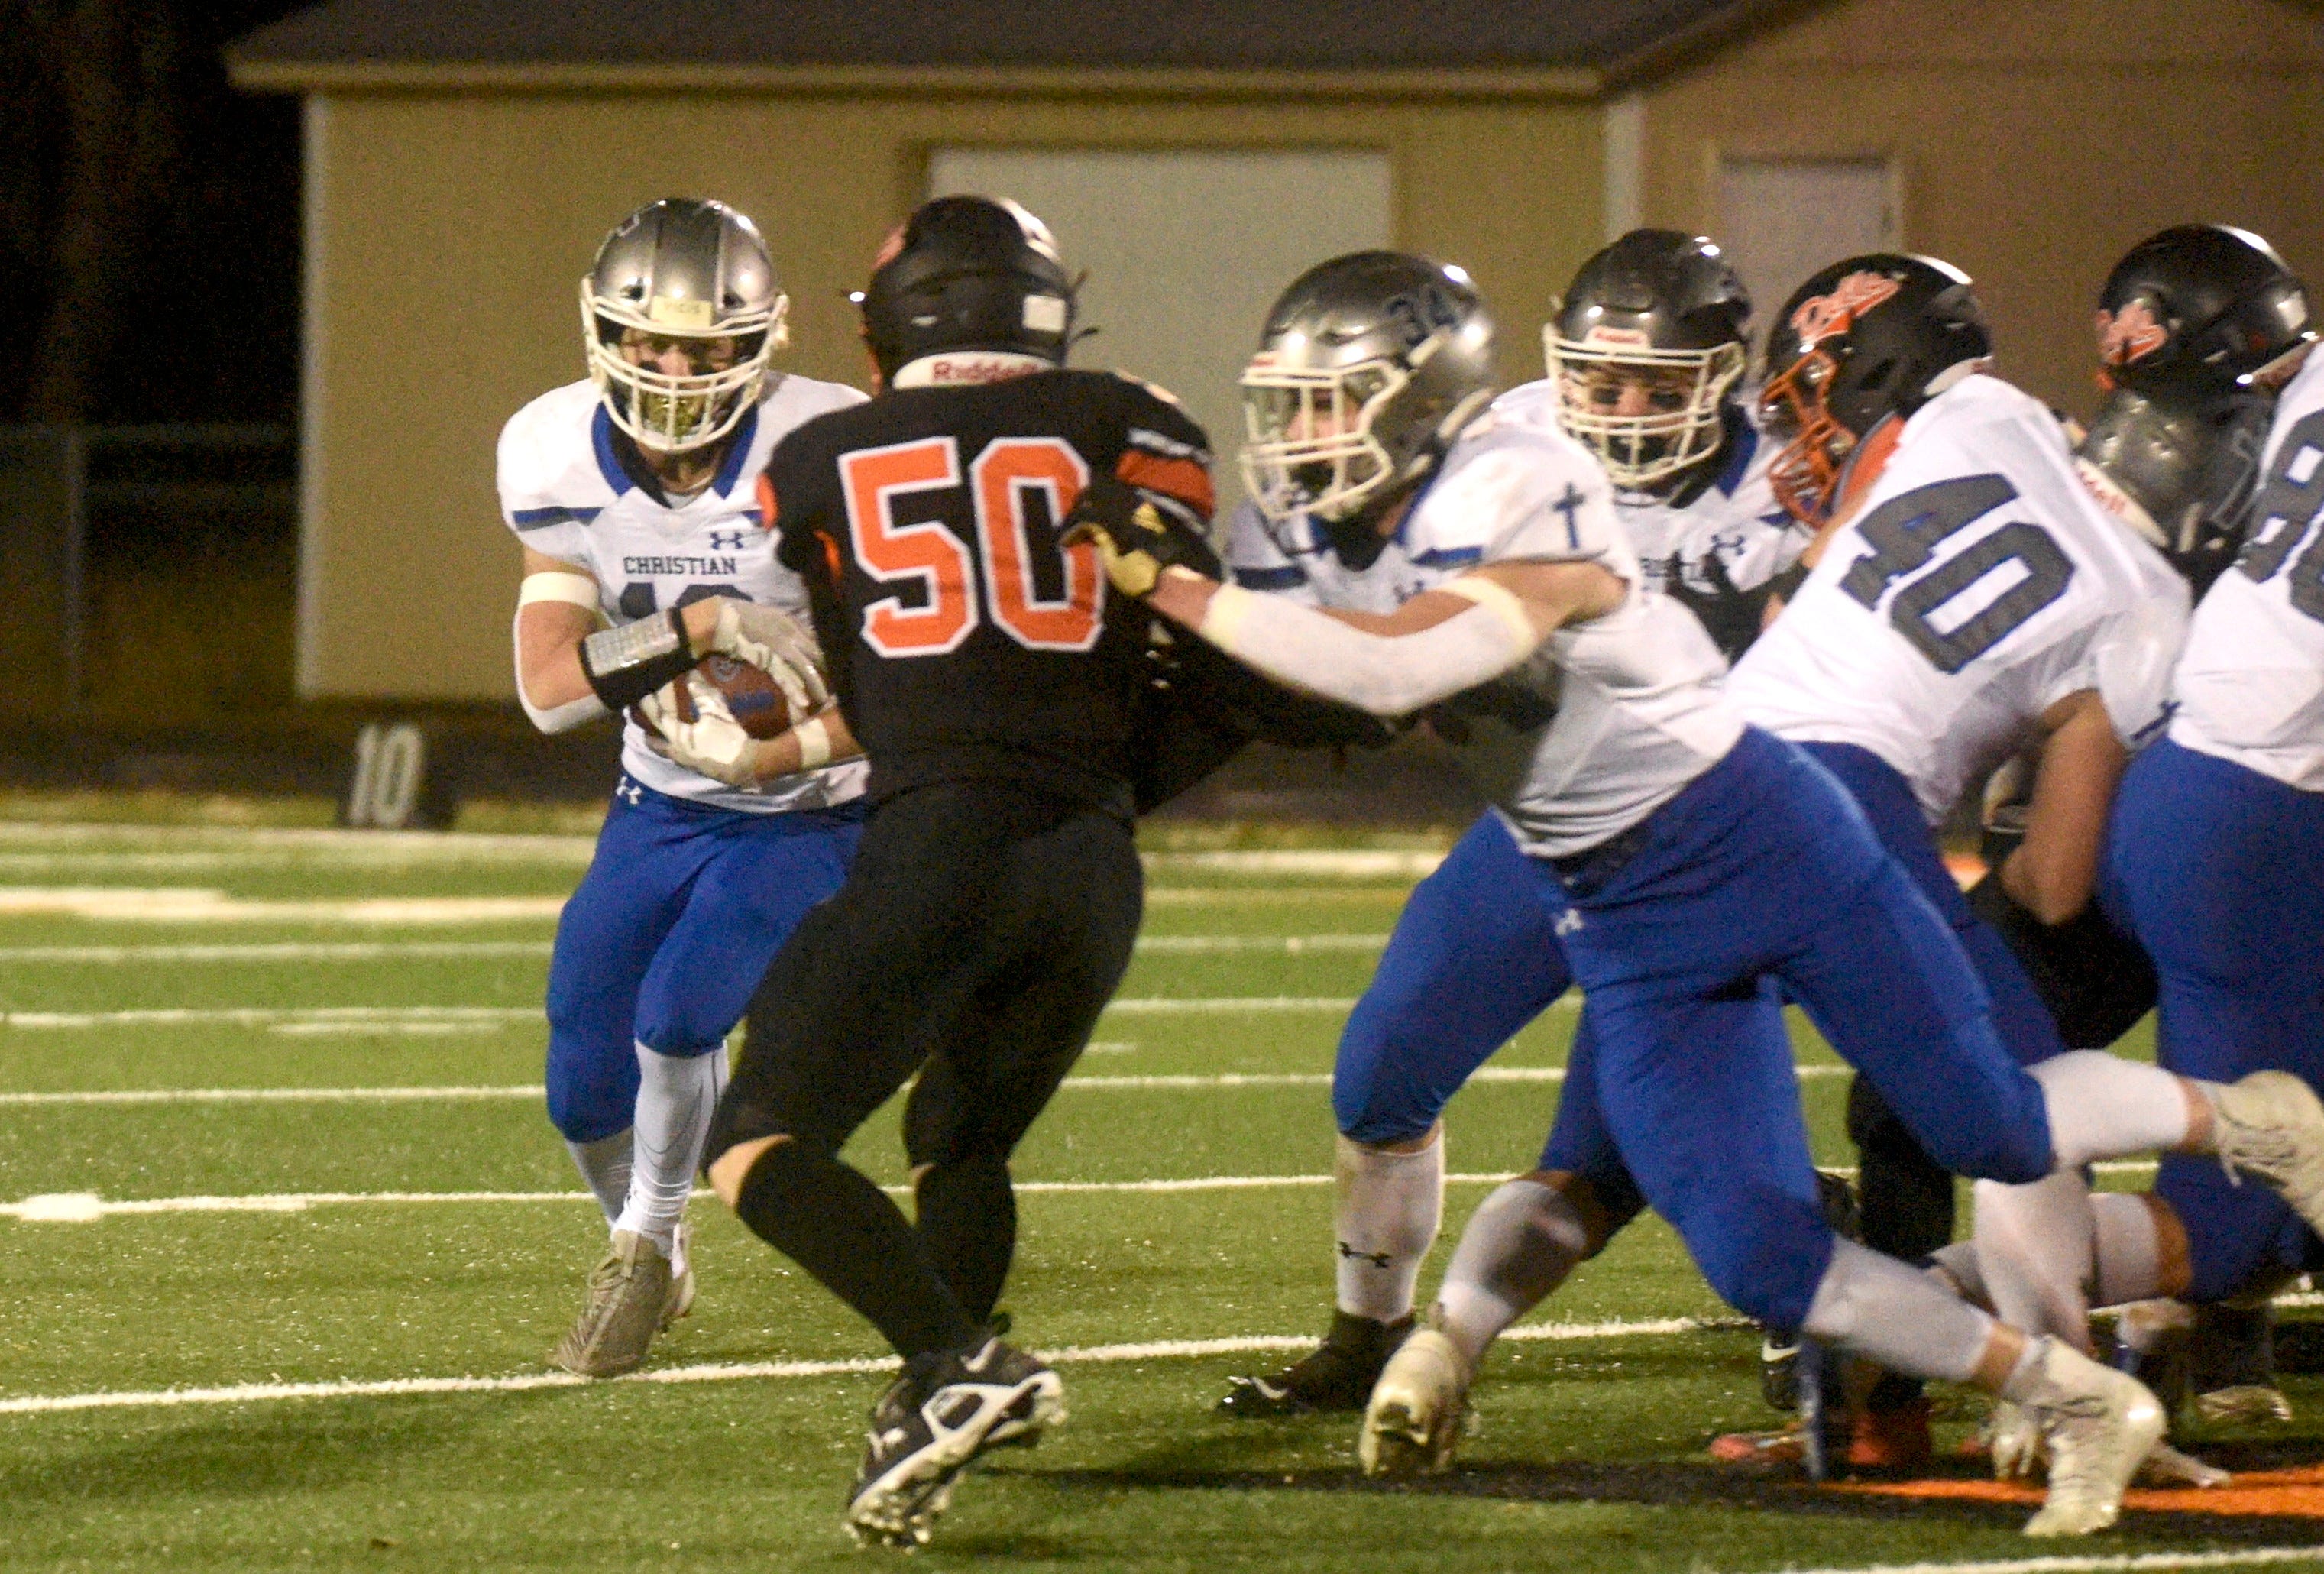 Dell Rapids' offense explodes in win over Sioux Falls Christian